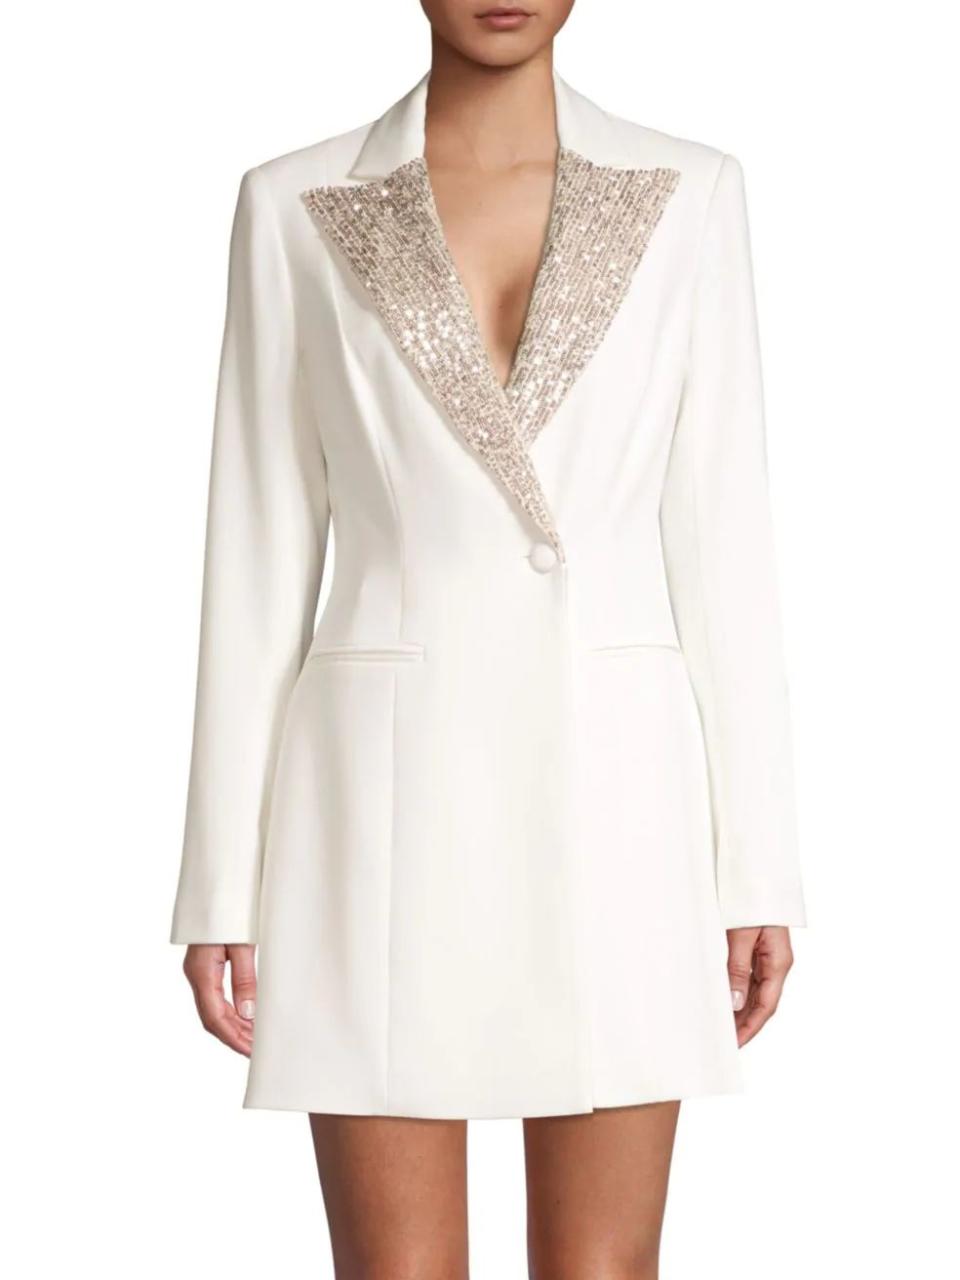 <a href="https://fave.co/338mu8e" target="_blank" rel="noopener noreferrer">Find it for $295 at Saks Fifth Avenue</a>.